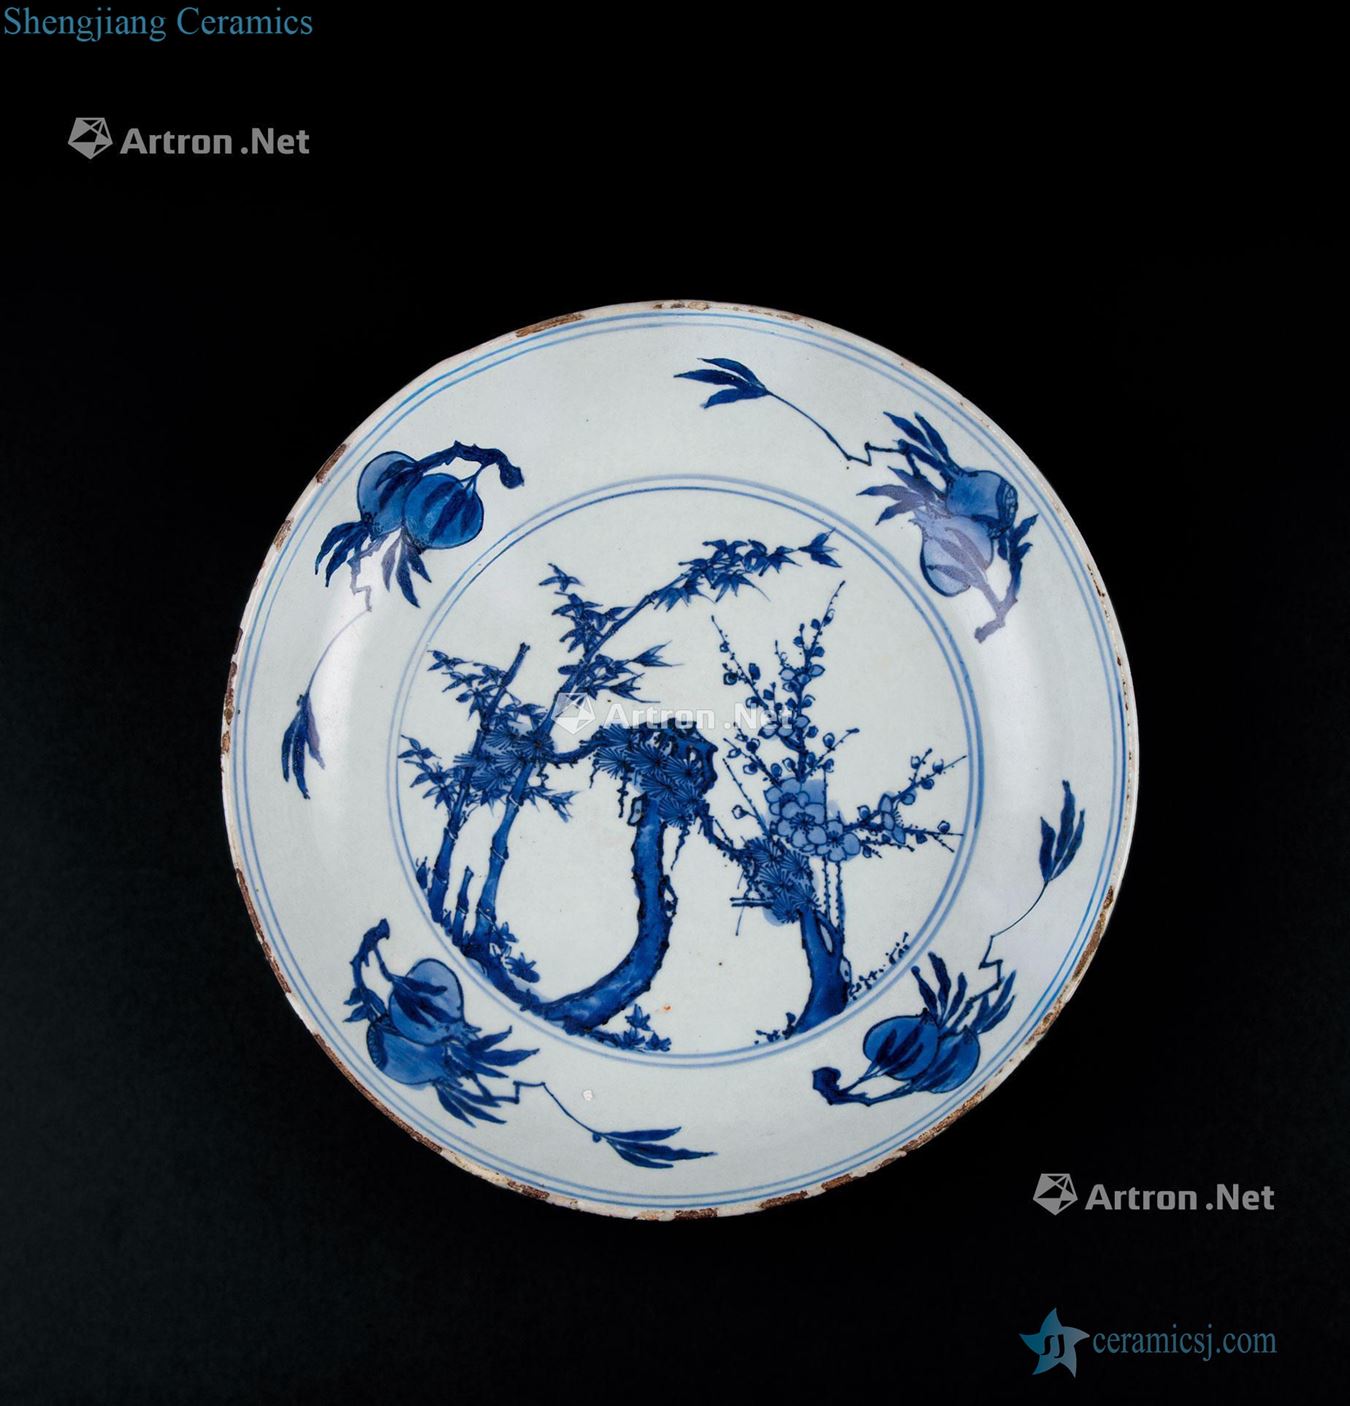 Age of late Ming dynasty (1627-1684) blue poetic lines